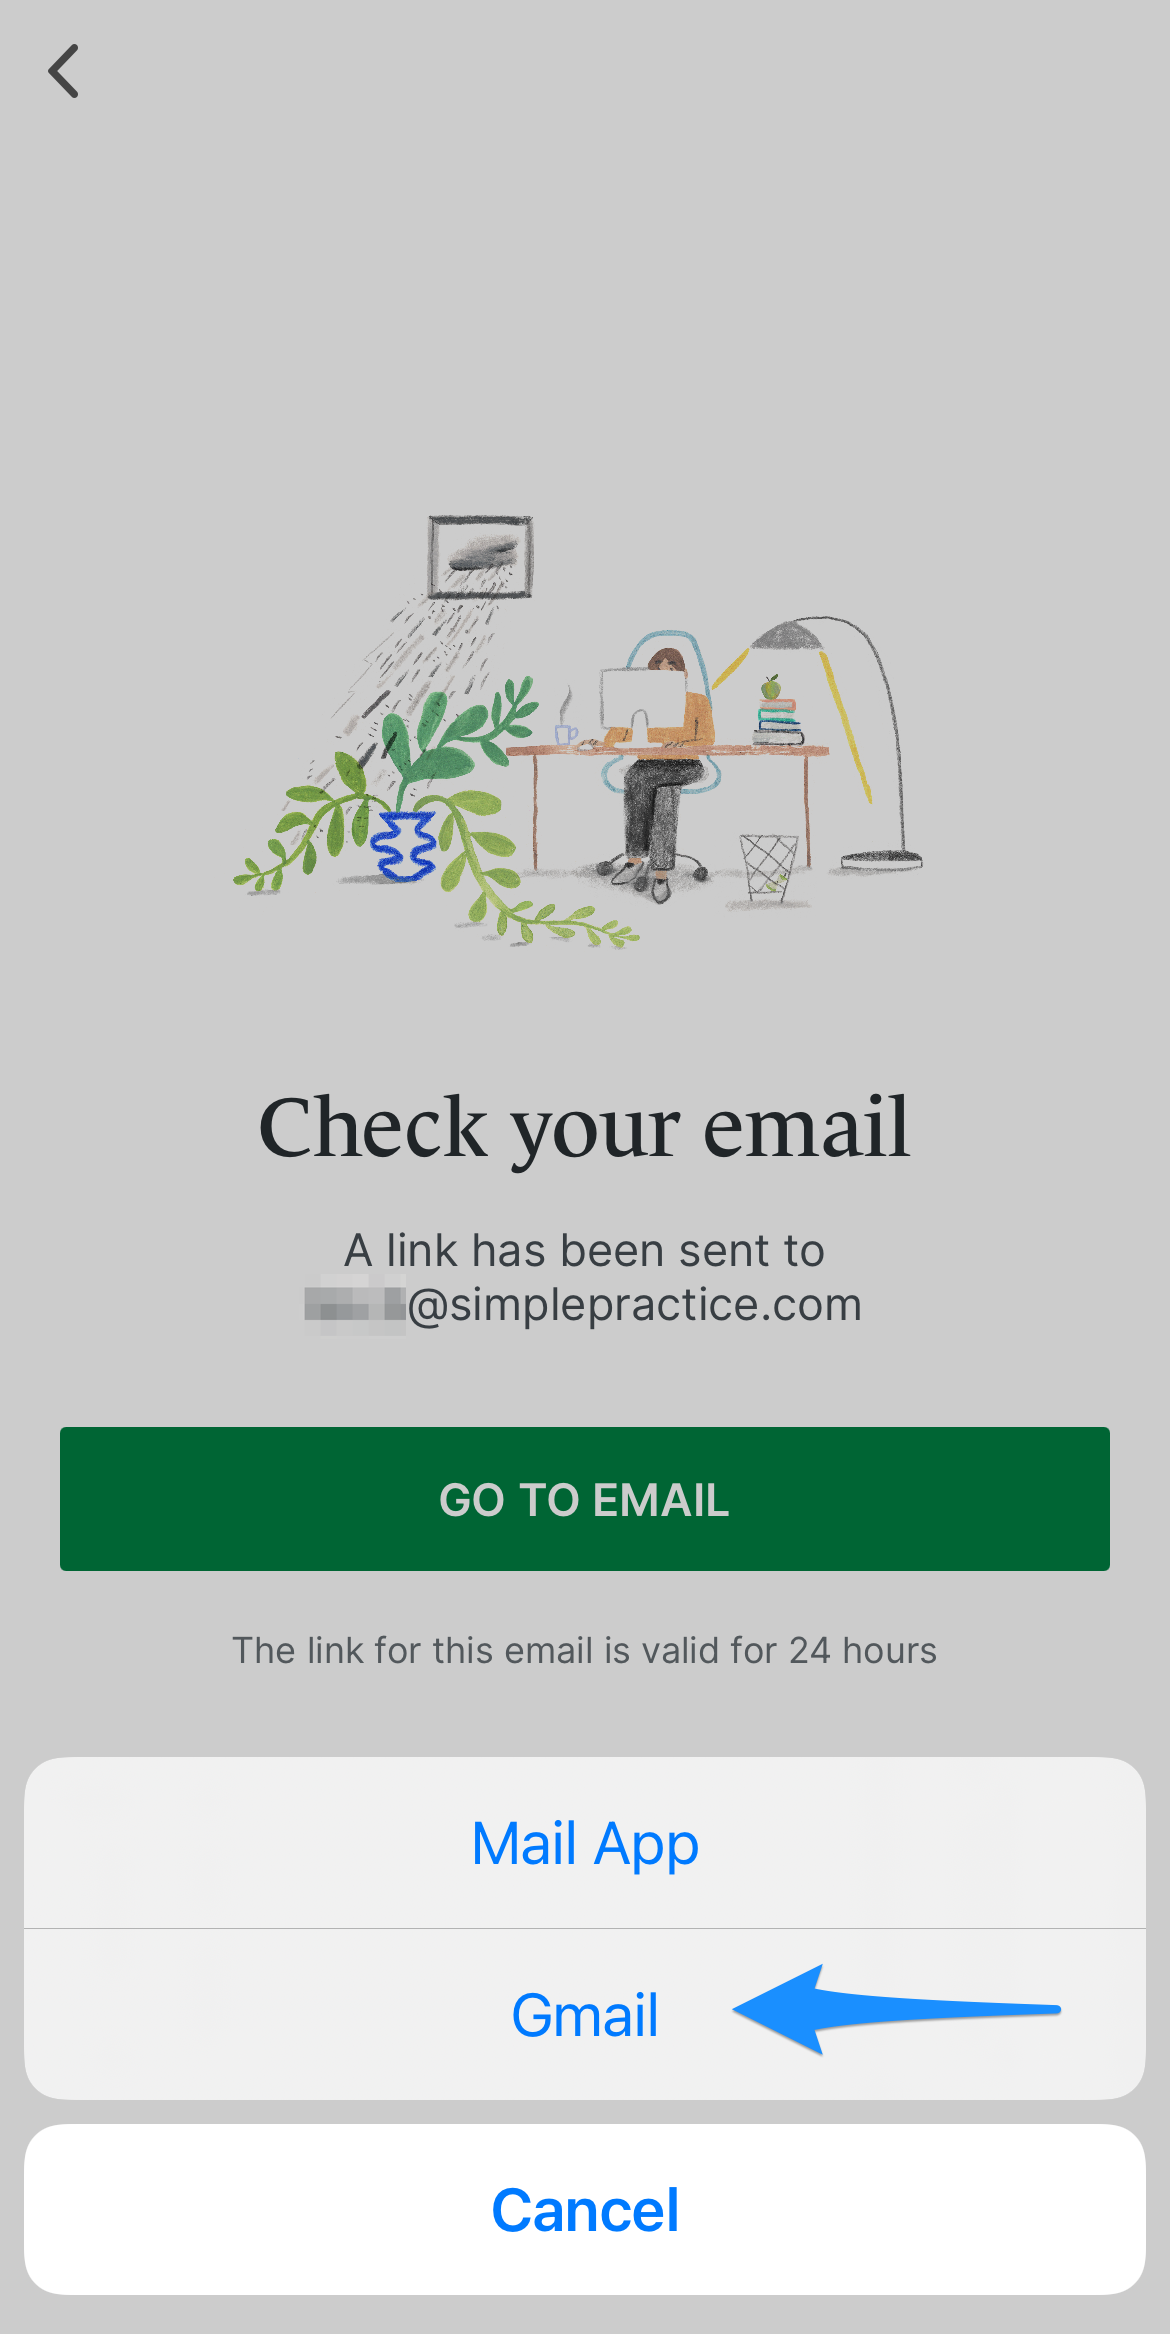 gotoemail.simplepractice.clientapp.png